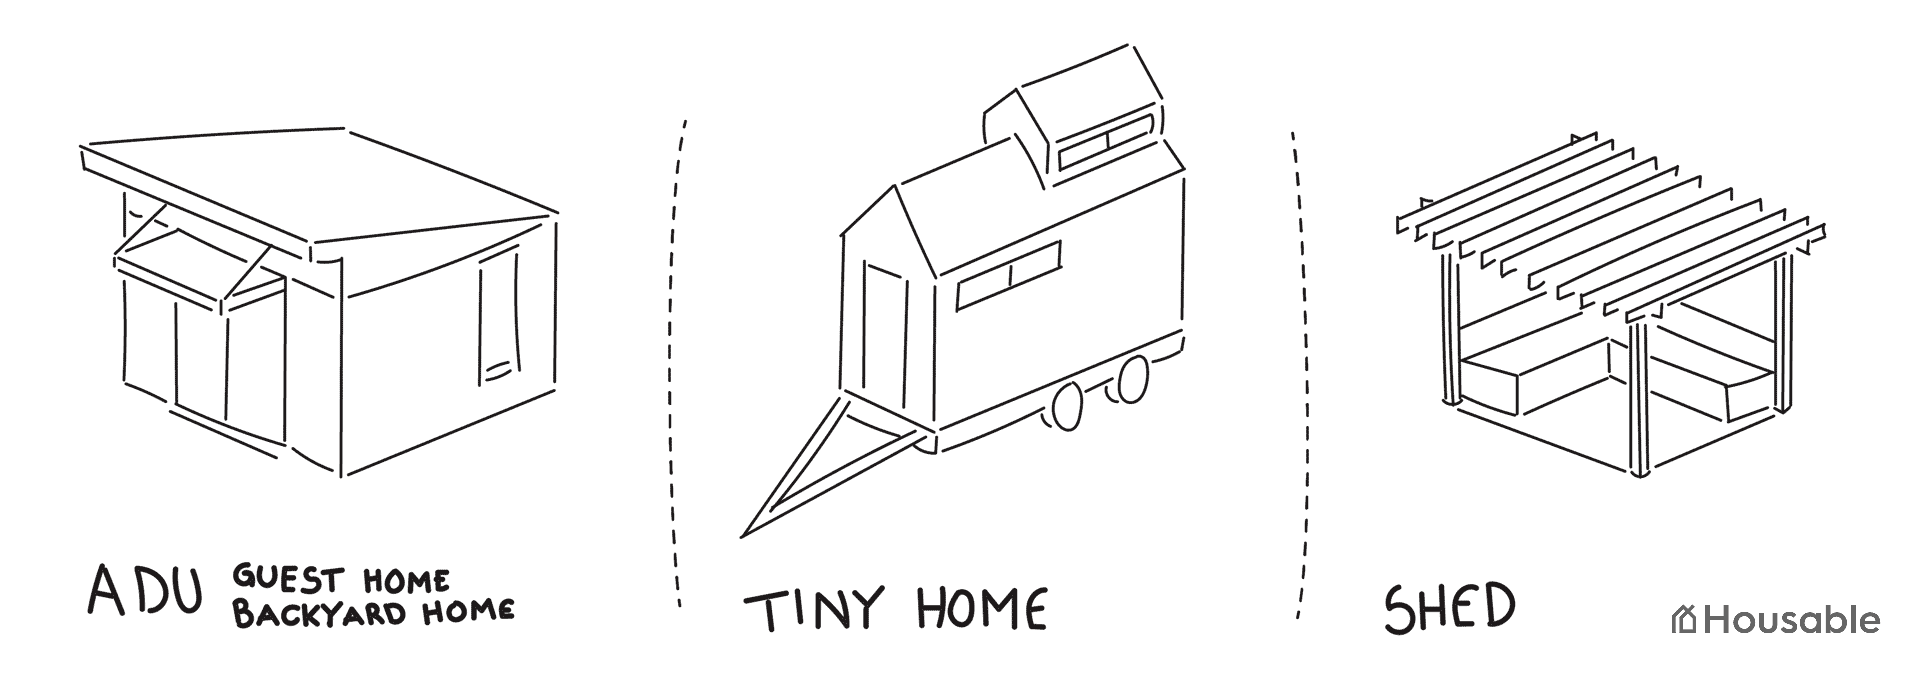 Introductory image showing different types of accessory structures: ADU, Tiny Home, Shed.